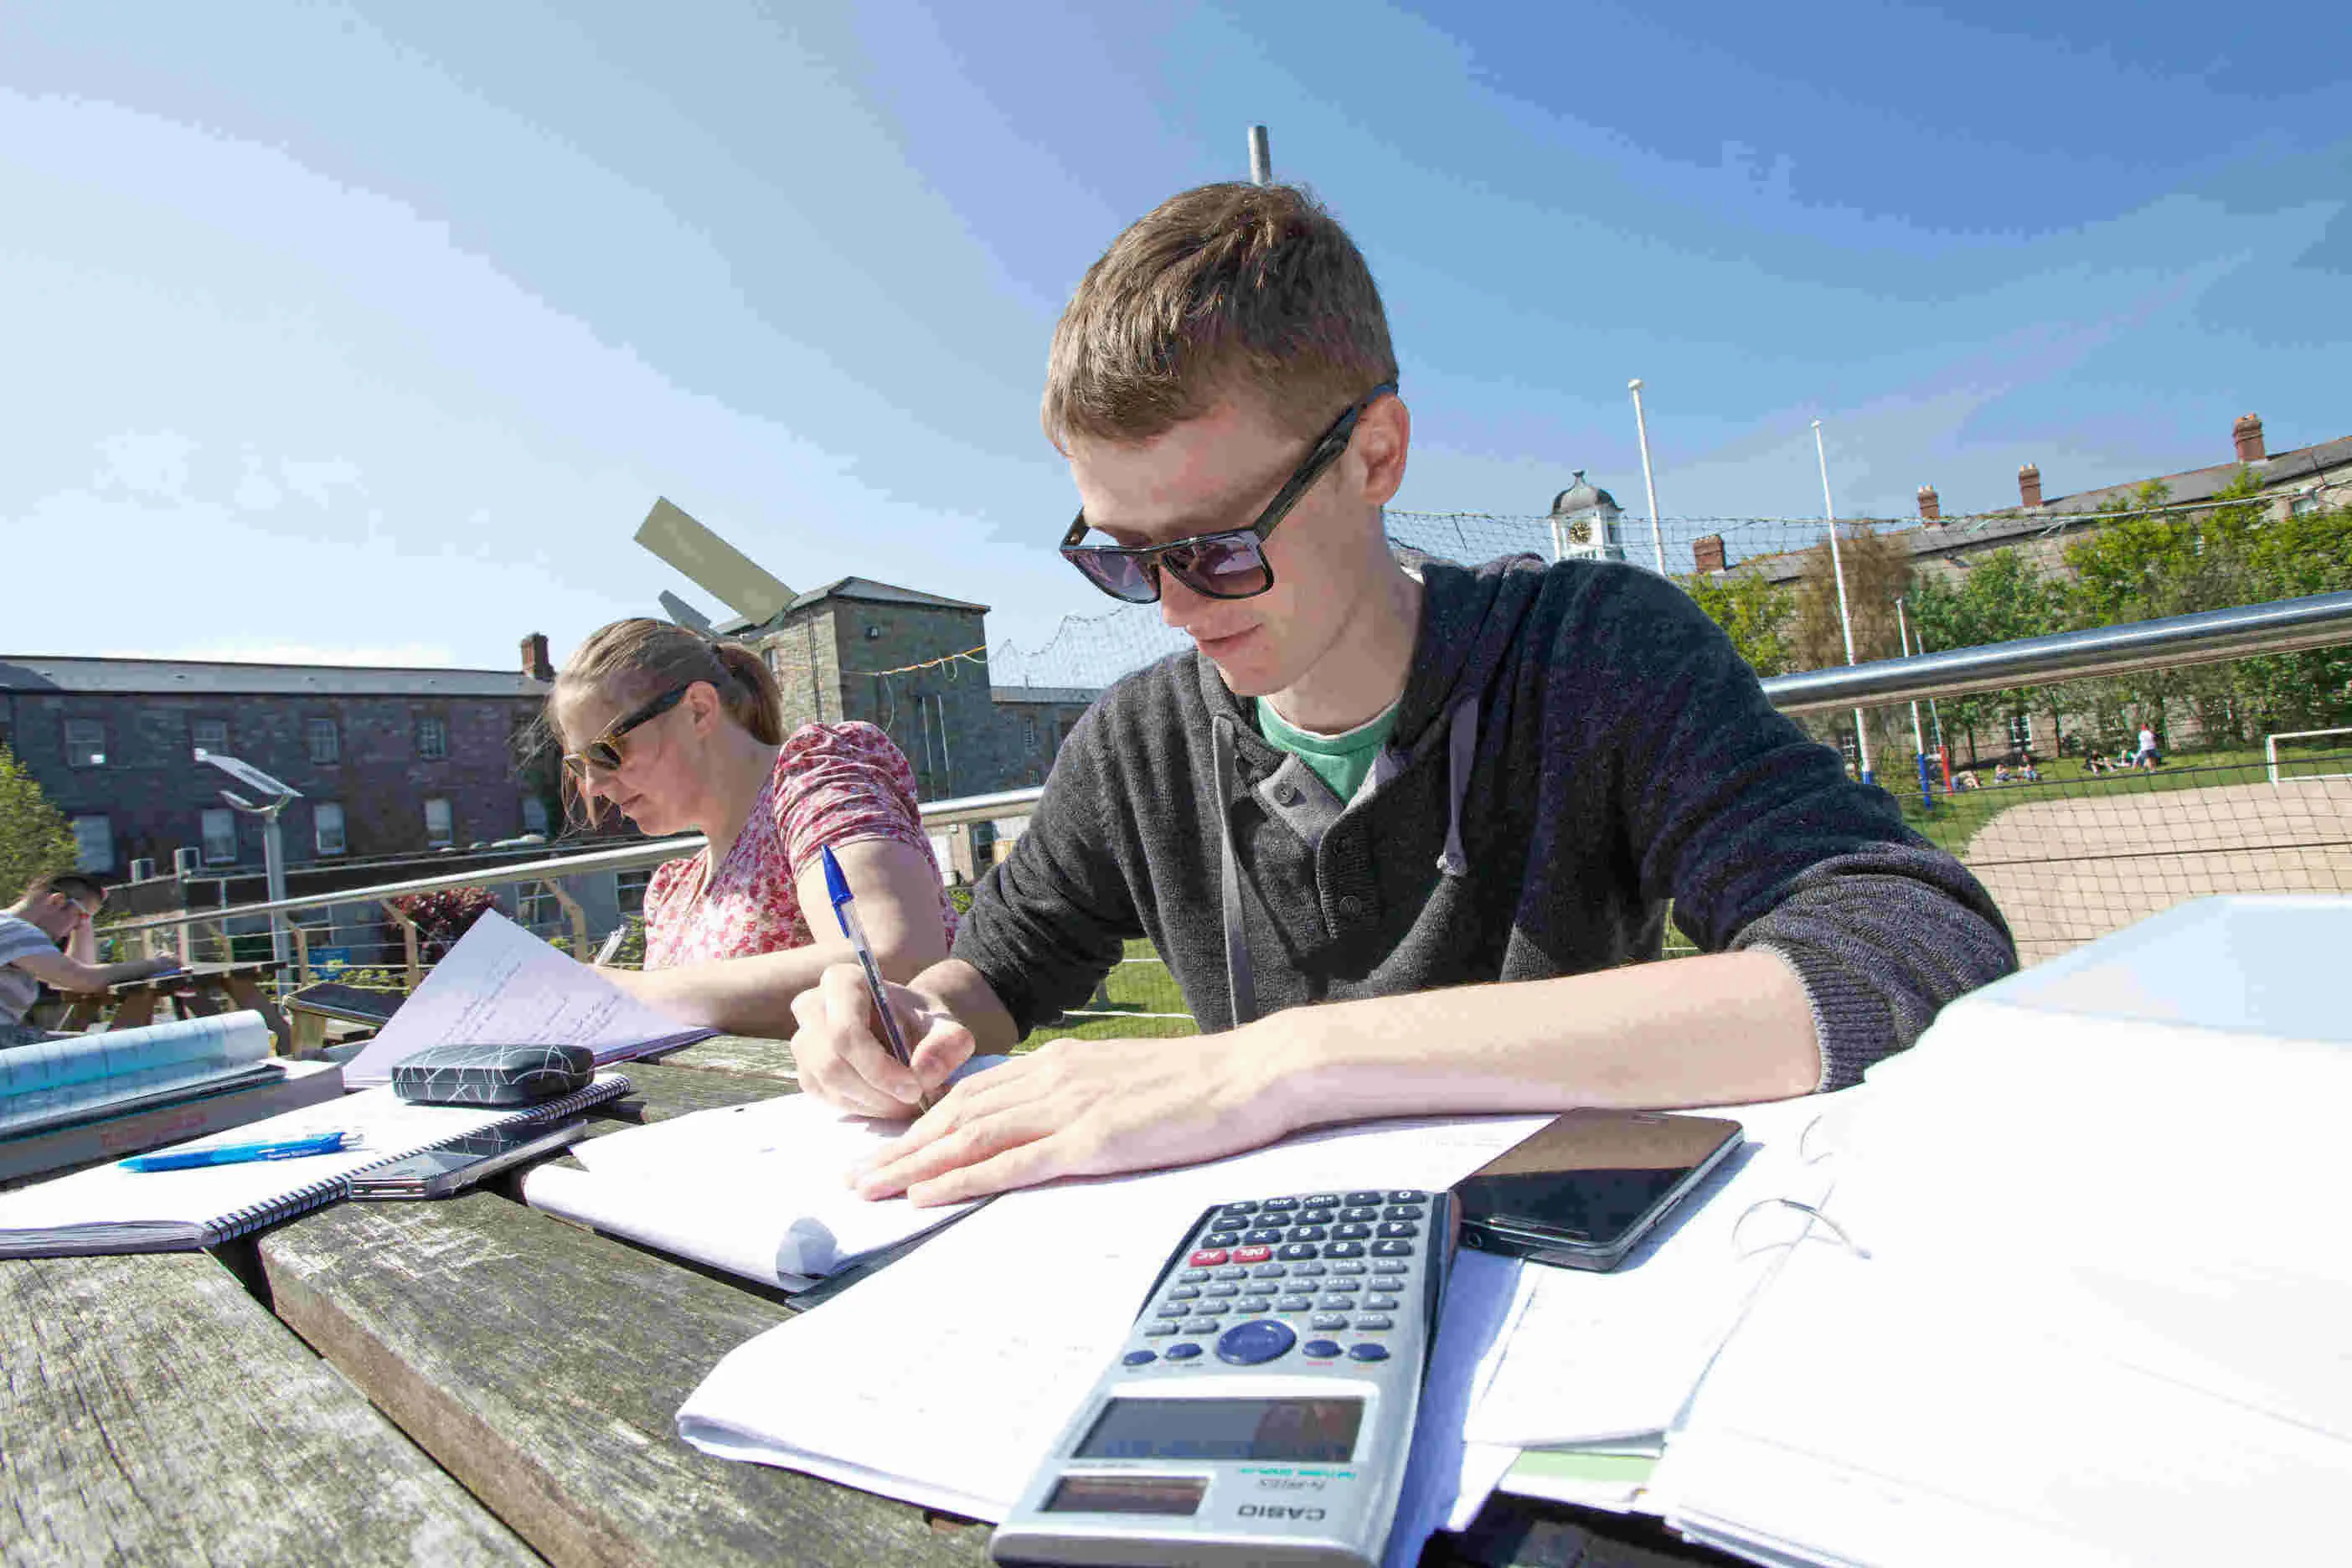 Accounting Technican Ireland Student outdoors